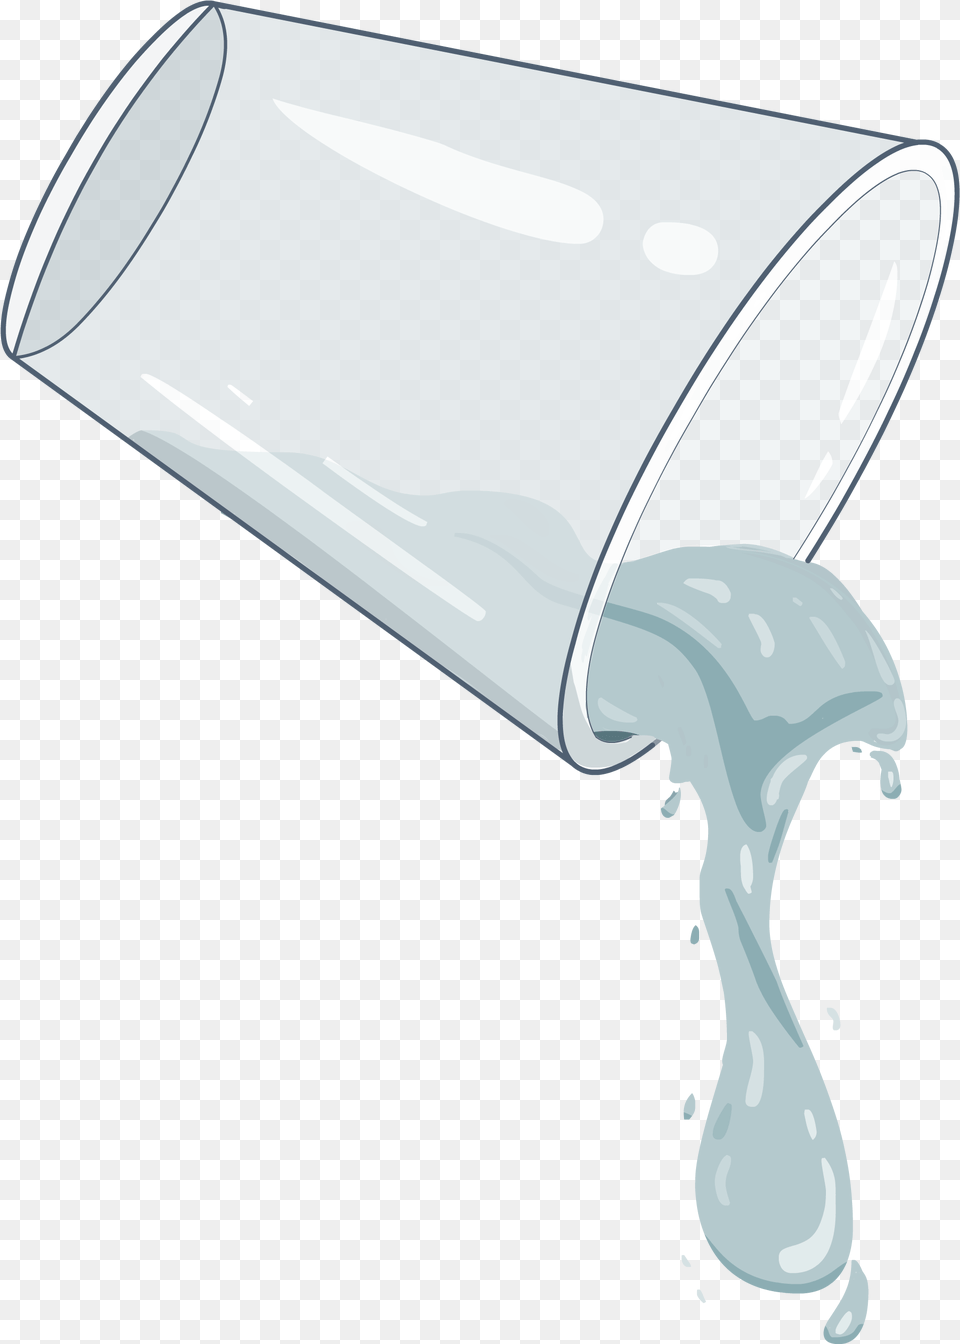 Water Pouring Pouring From A Glass, Beverage, Milk, Cup, Blade Free Transparent Png